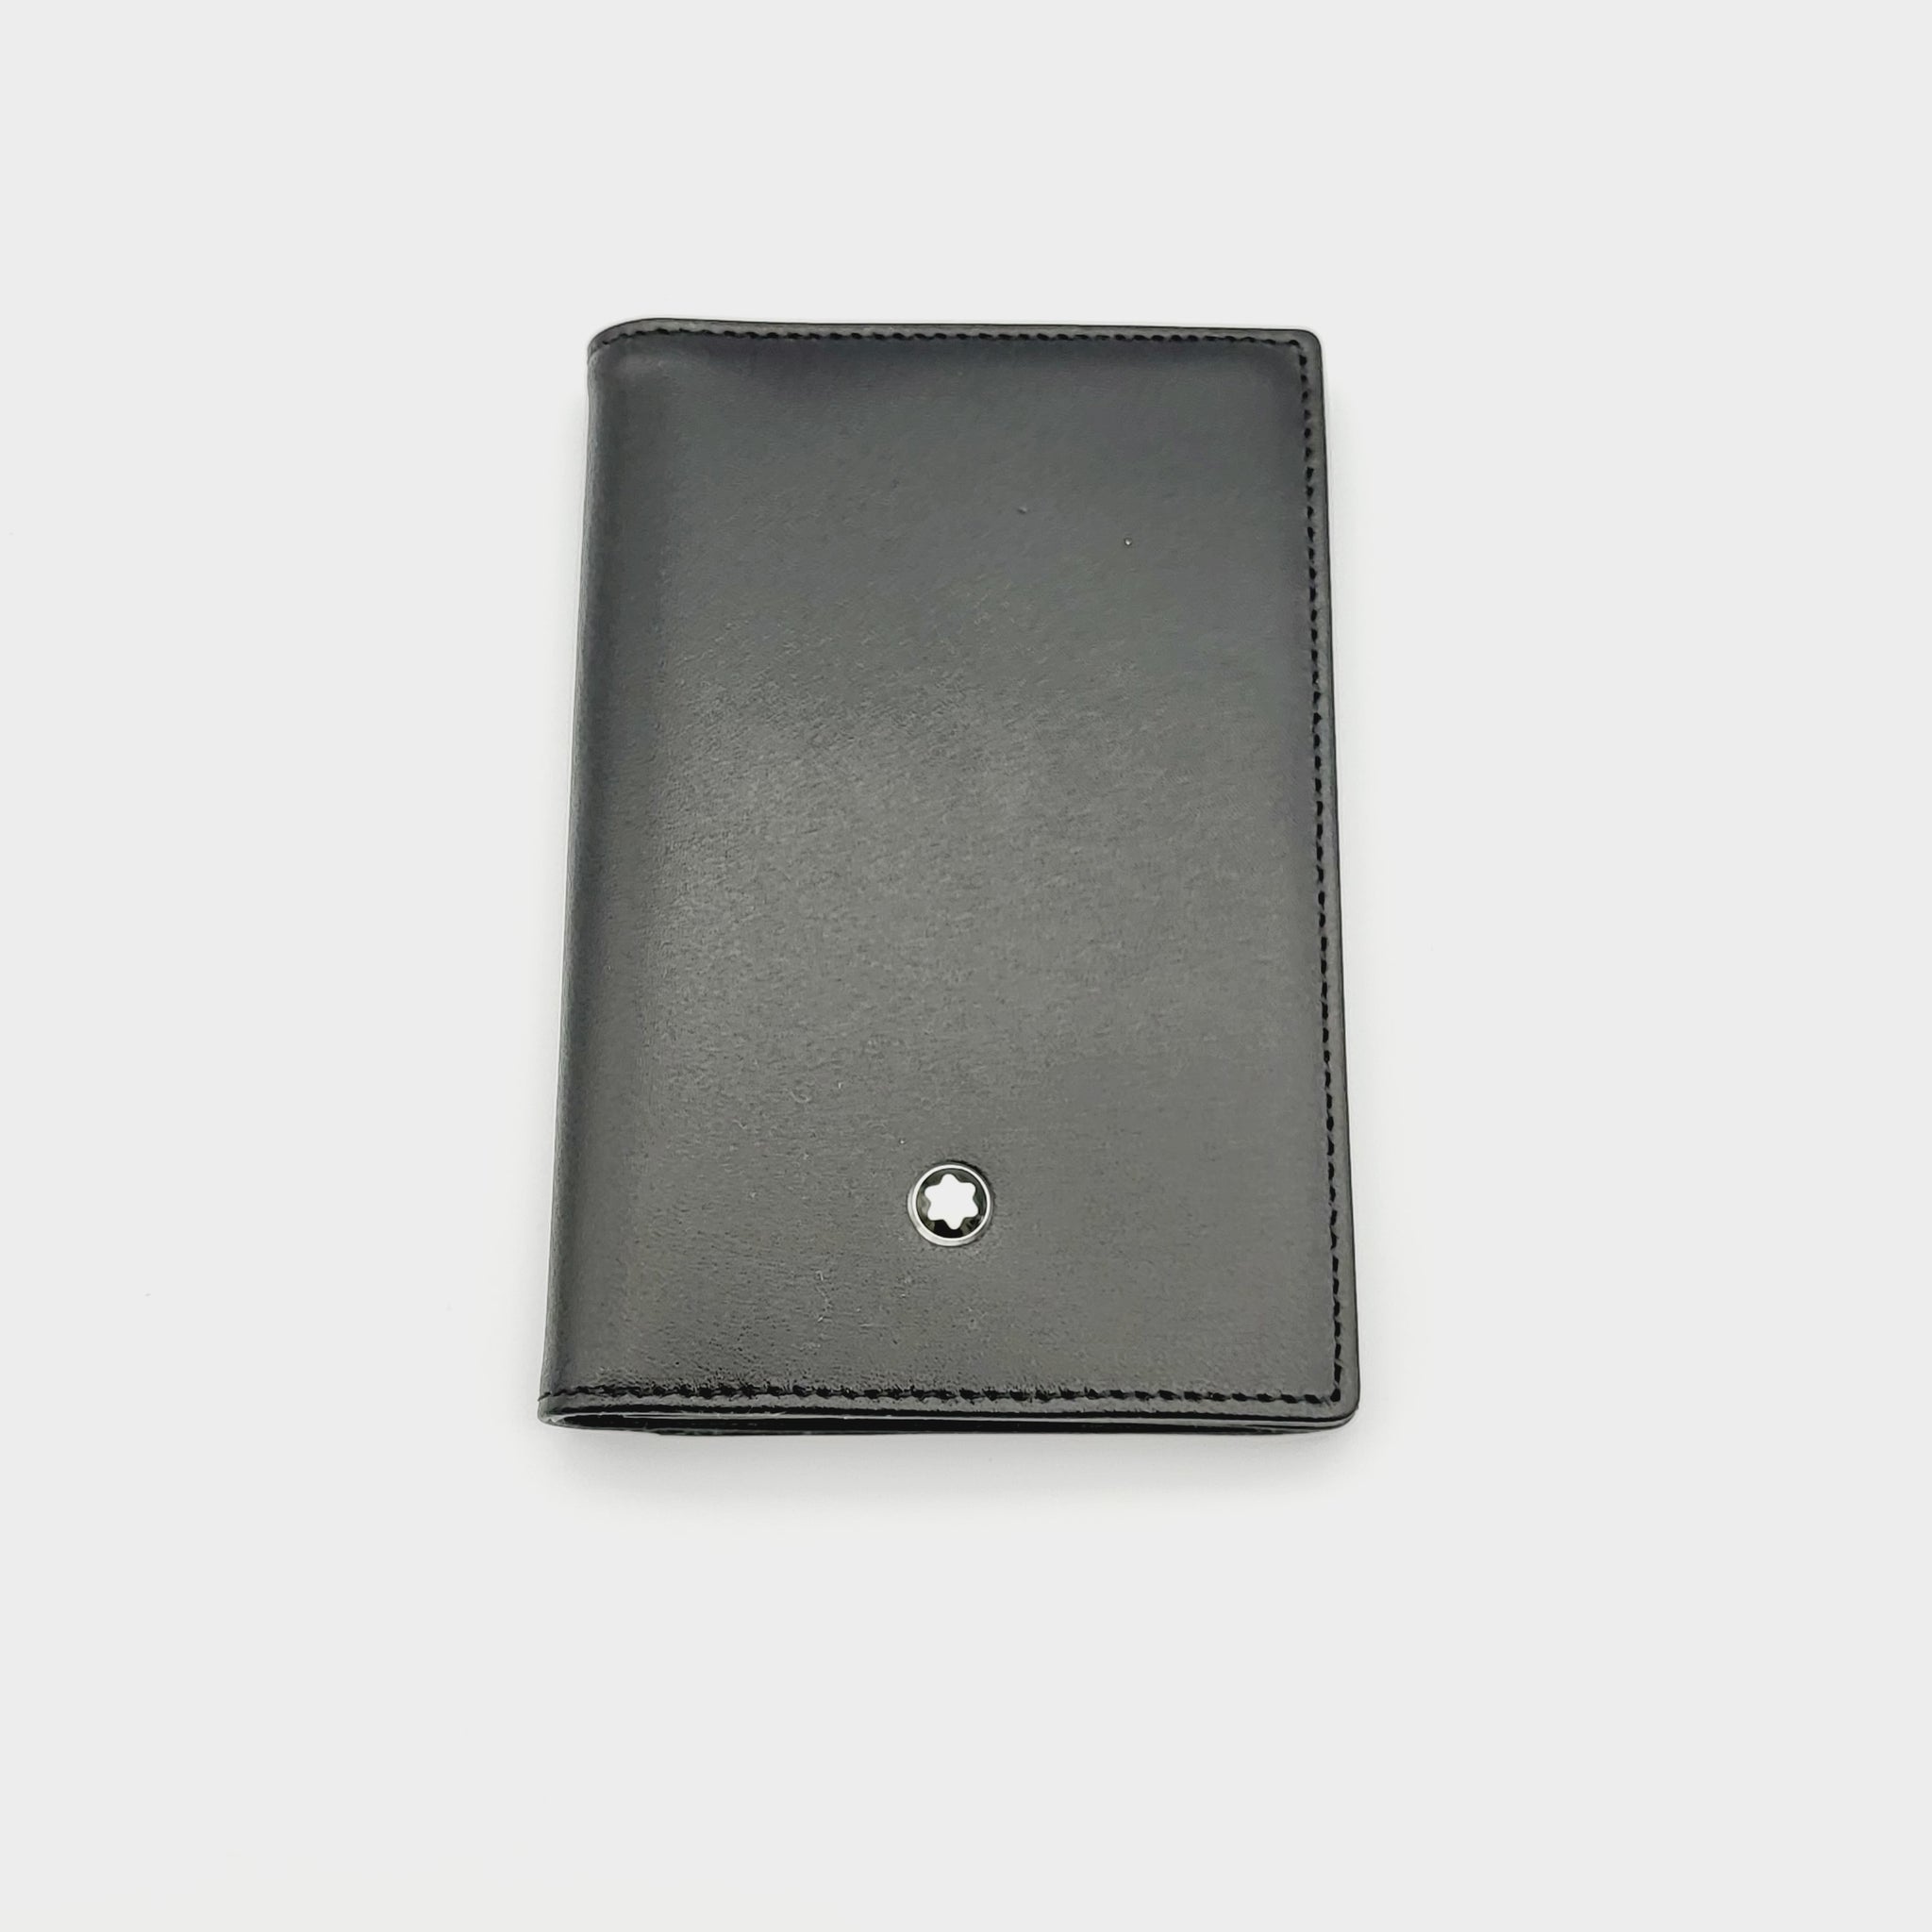 Montblanc Montblanc Meisterstuck Black Leather Cardholder/Small Wallet - #14108 freeshipping - RiNo Distribution